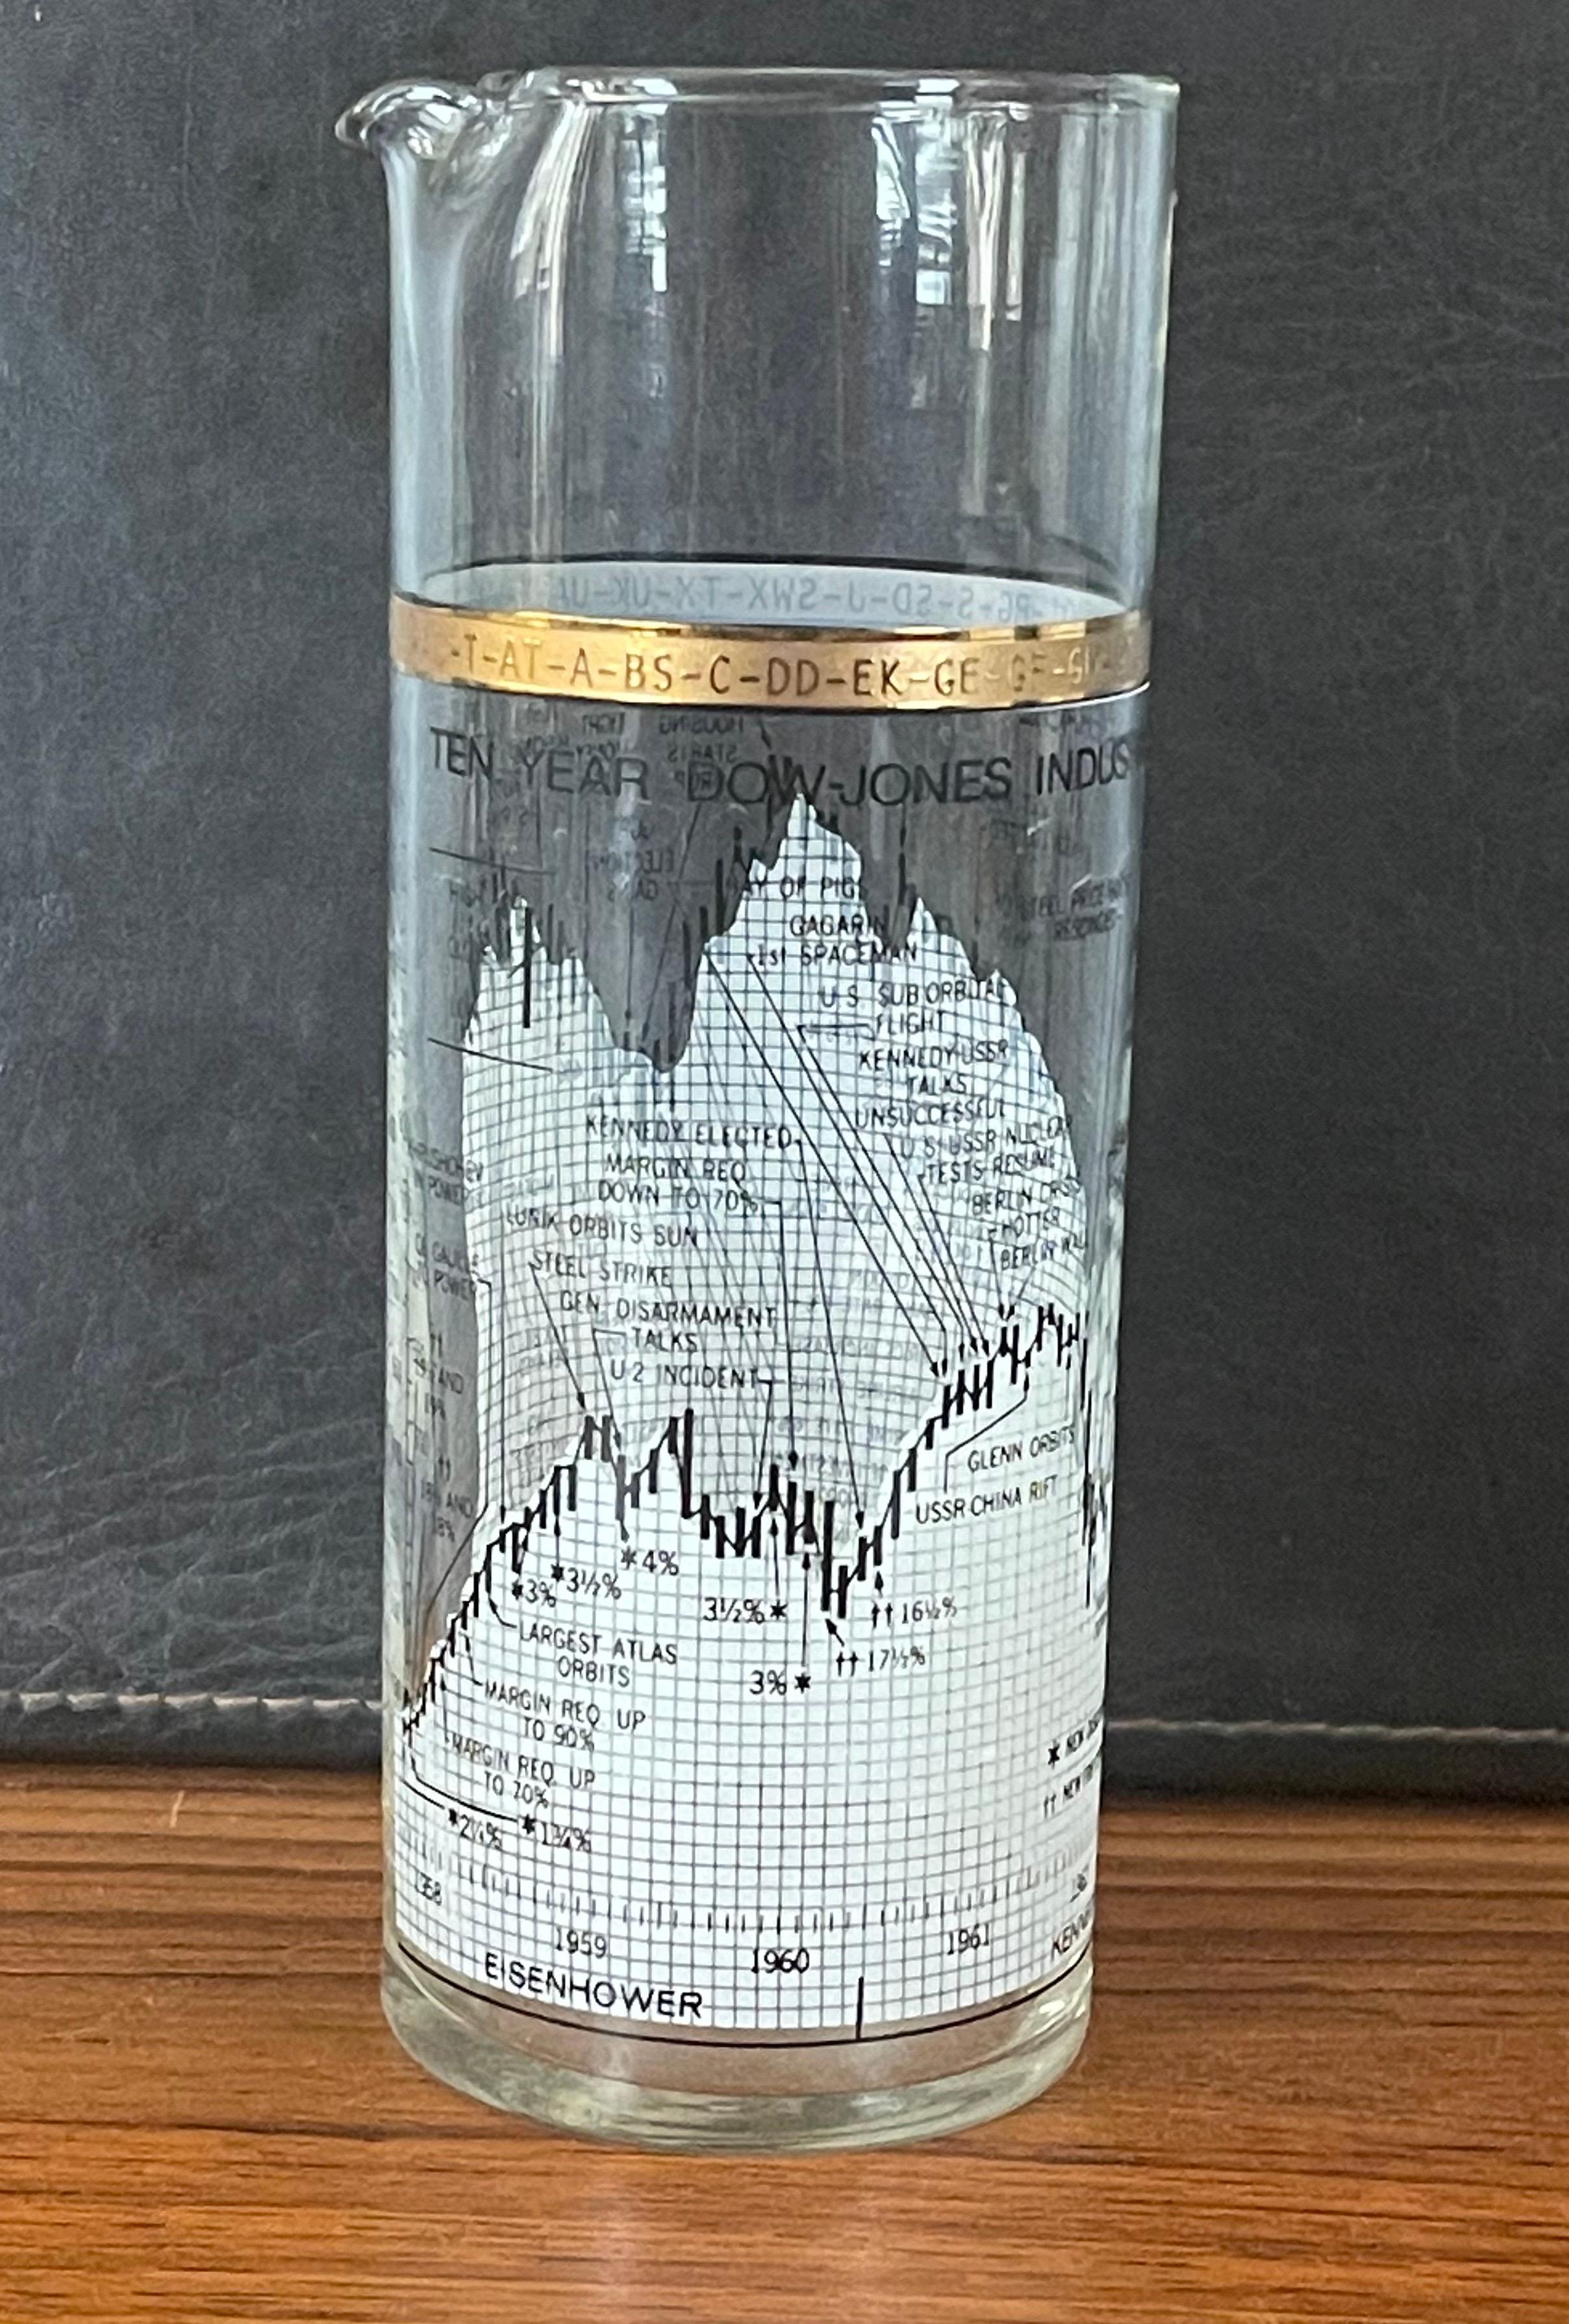 Great set of four double old fashioned glasses (14oz) and a pitcher tracking the Dow Jones Industrial Average (DJIA) from 1958 to 1968 by Cera, circa late 1970s. Each piece captures 10 years of current events and their impact on the stock market.